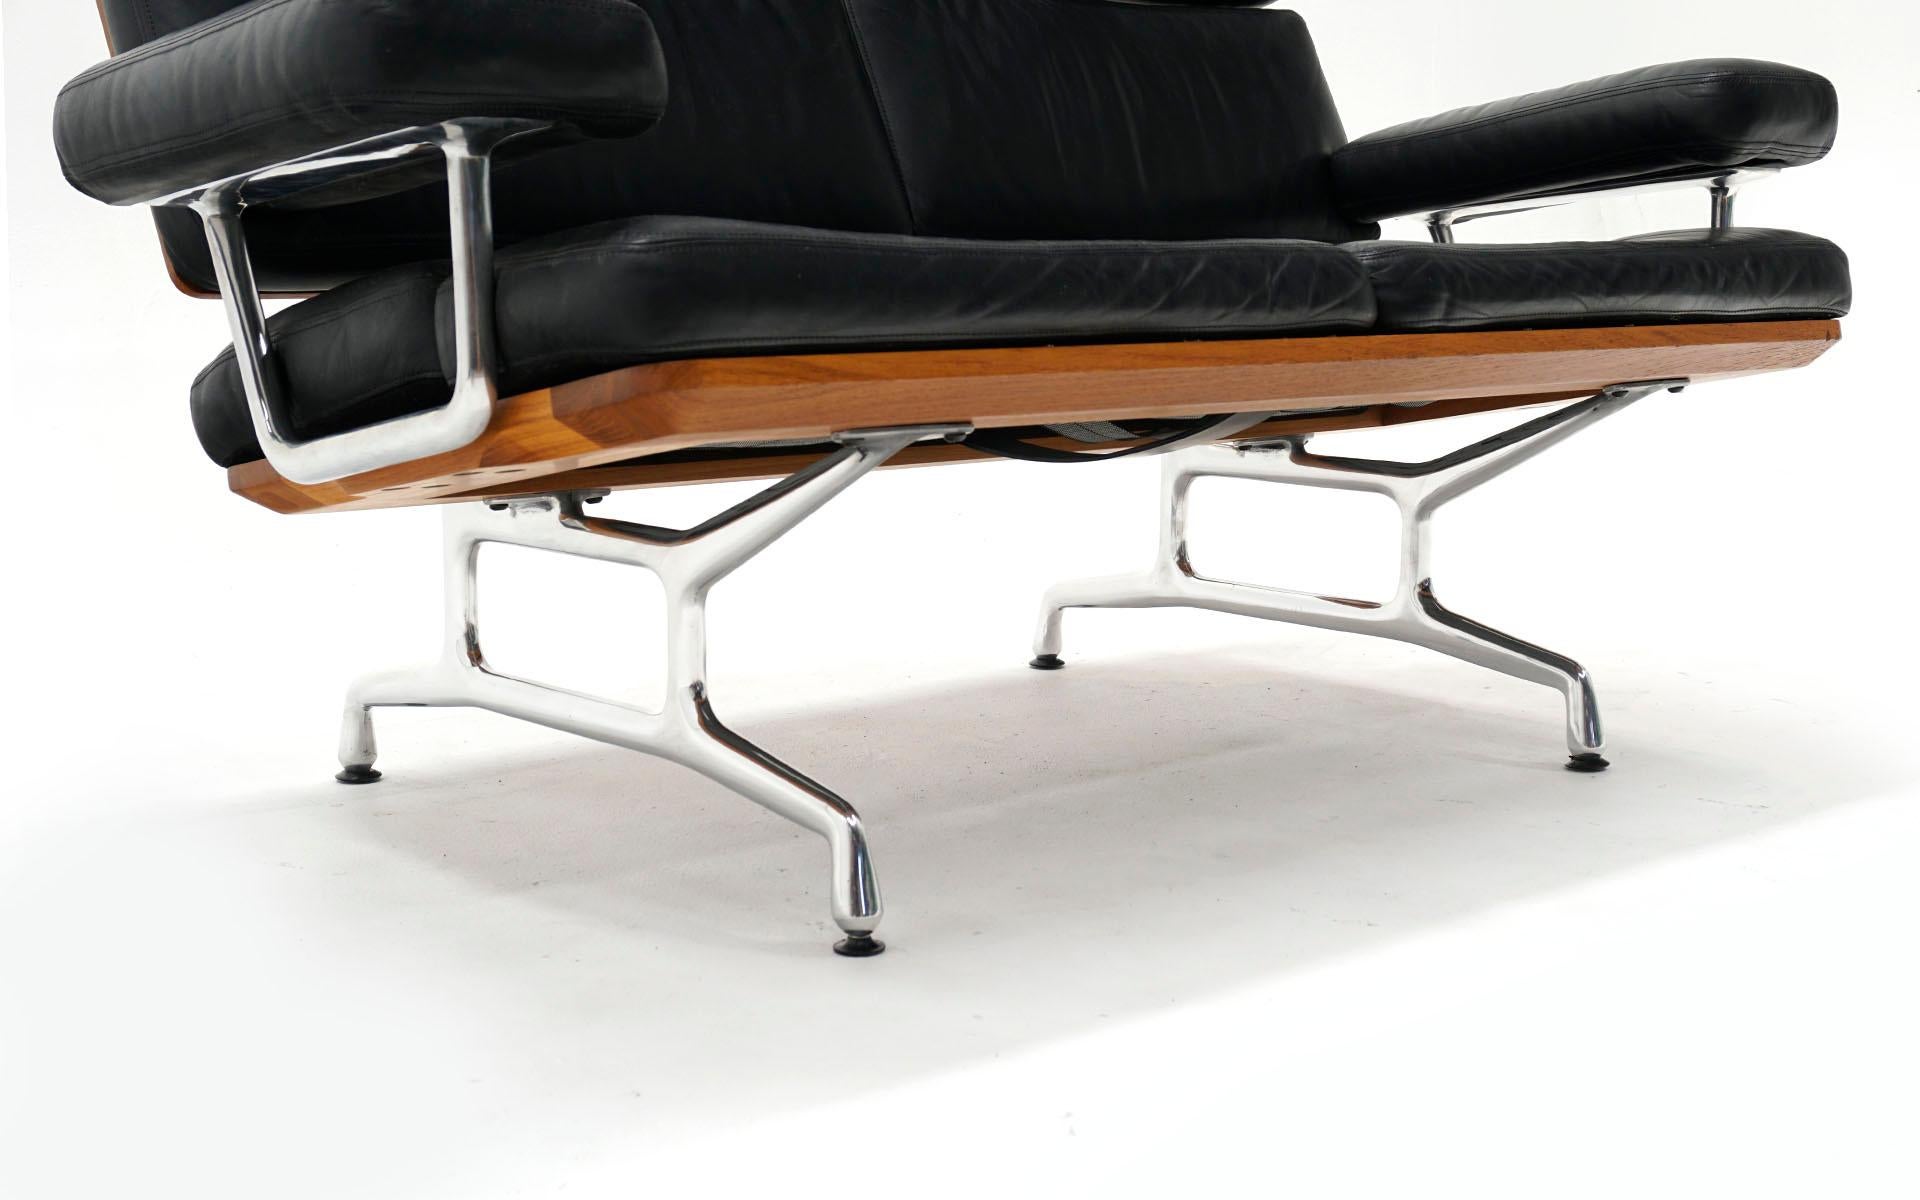 Aluminum 2 Seat Sofa Settee by Charles and Ray Eames, Solid Walnut and Black Leather